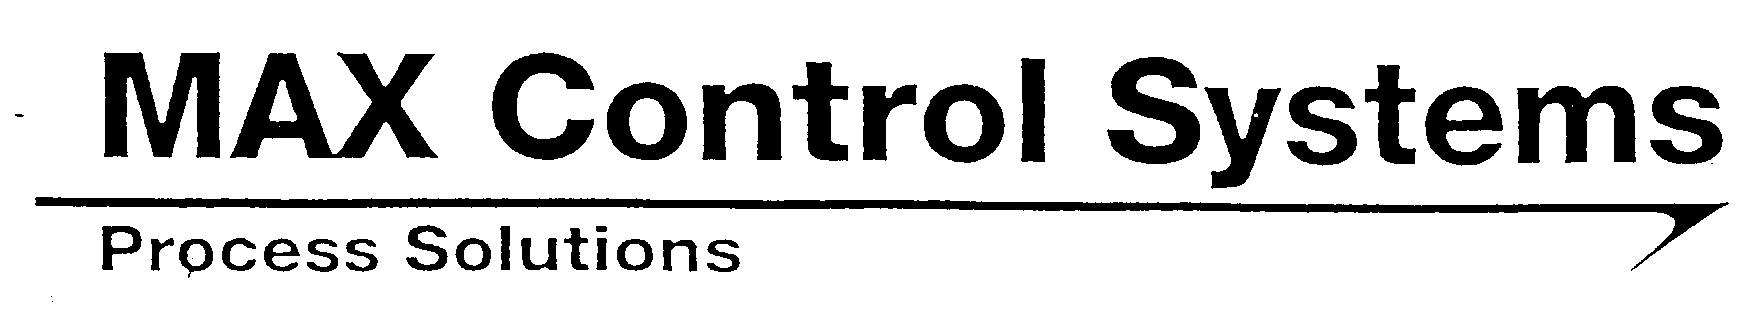 Trademark Logo MAX CONTROL SYSTEMS PROCESS SOLUTIONS